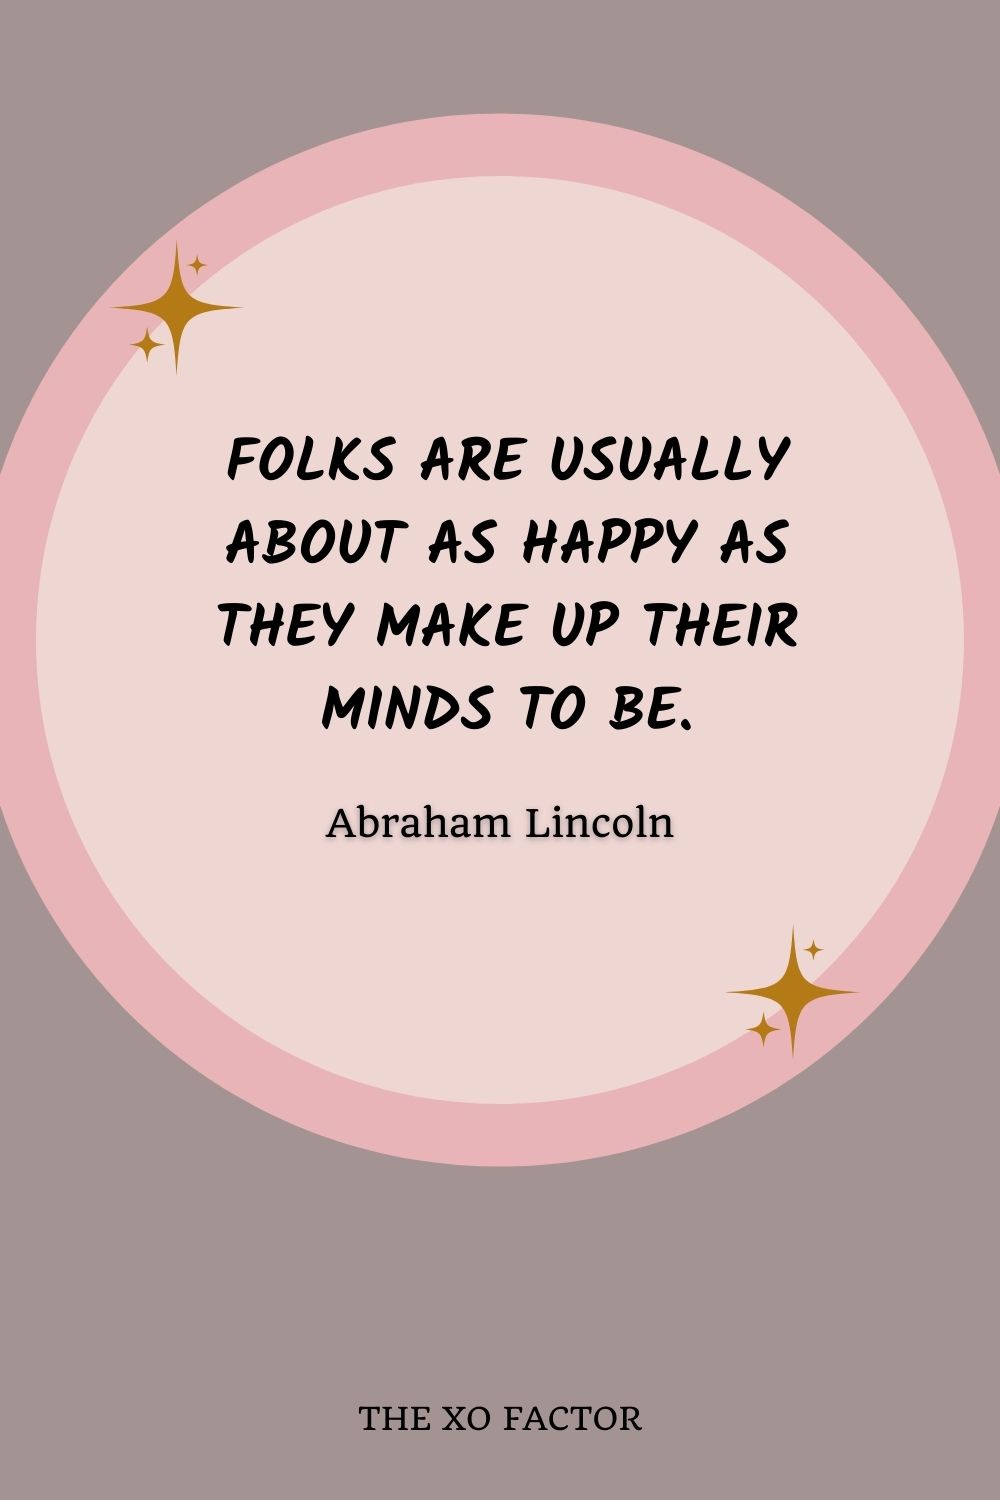 Folks are usually about as happy as they make up their minds to be.” – Abraham Lincoln